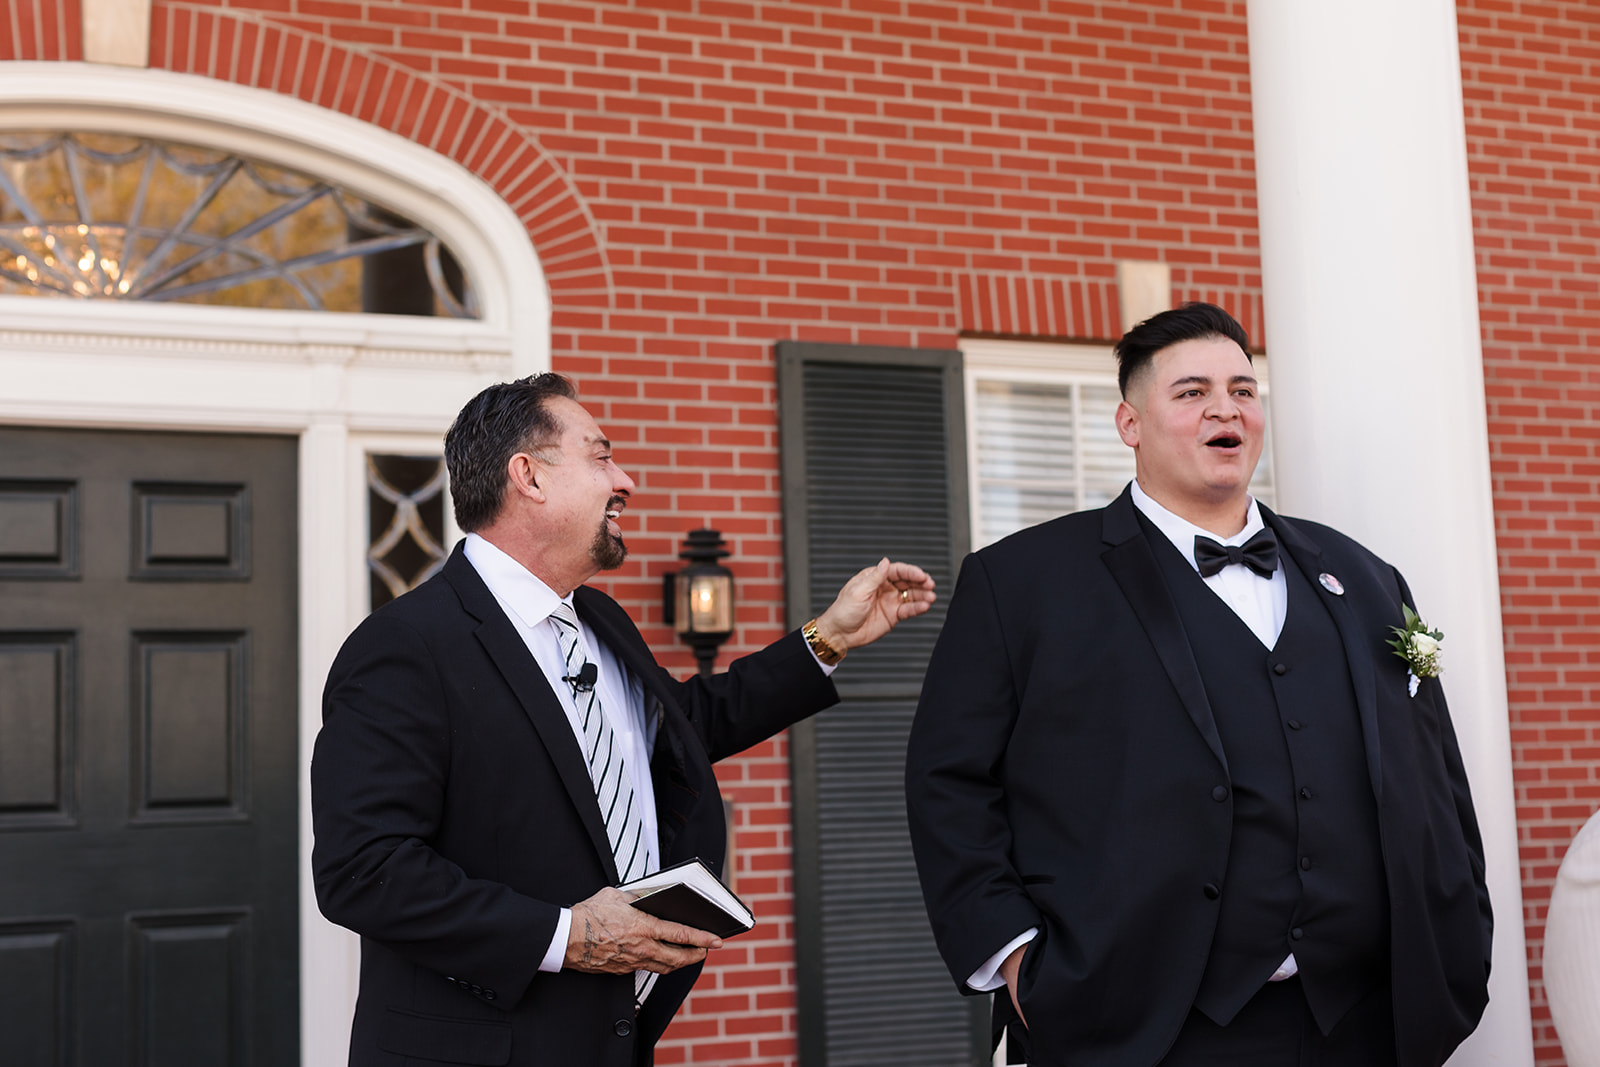 Groom says "wow" as he sees the bride for the first time as she comes down the aisle